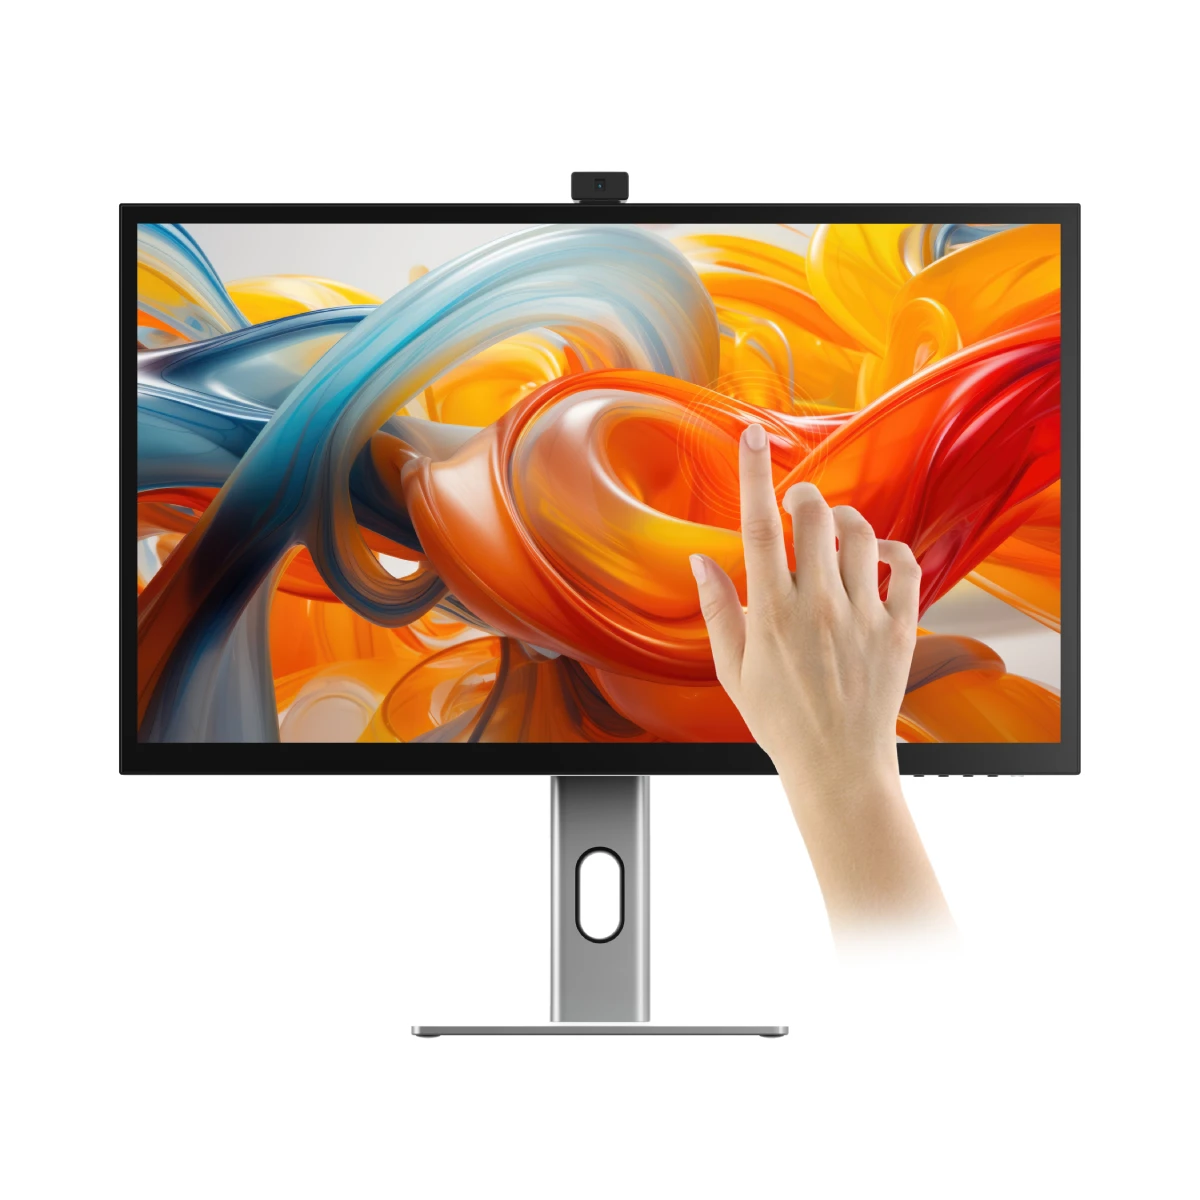 clarity-pro-touch-27-uhd-4k-monitor-with-65w-pd-webcam-and-touchscreen-thunderbolt-4-blaze-docking-station_7